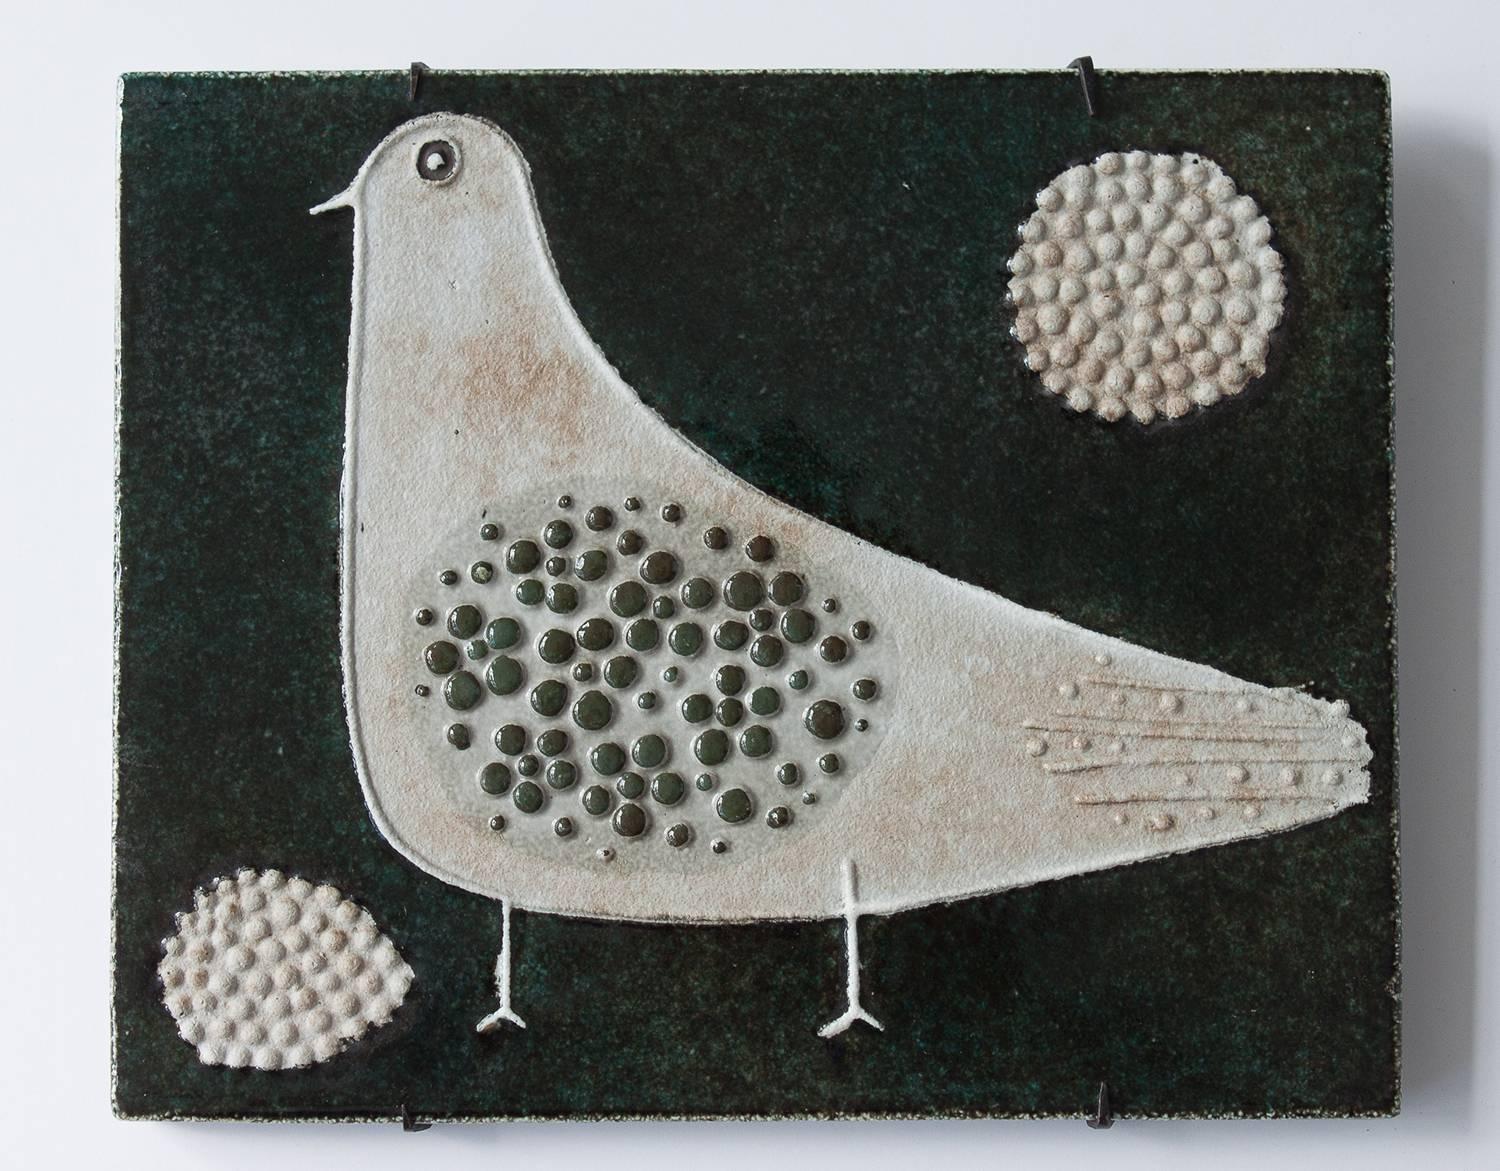 Decorative ceramic wall tile by Swedish artist Sylvia Leuchovius for Rorstrand. Stylized bird relief on dark blue-green glazed background. Original black iron mounting bracket. Sylvia's motifs are centered on plants, birds and children have been